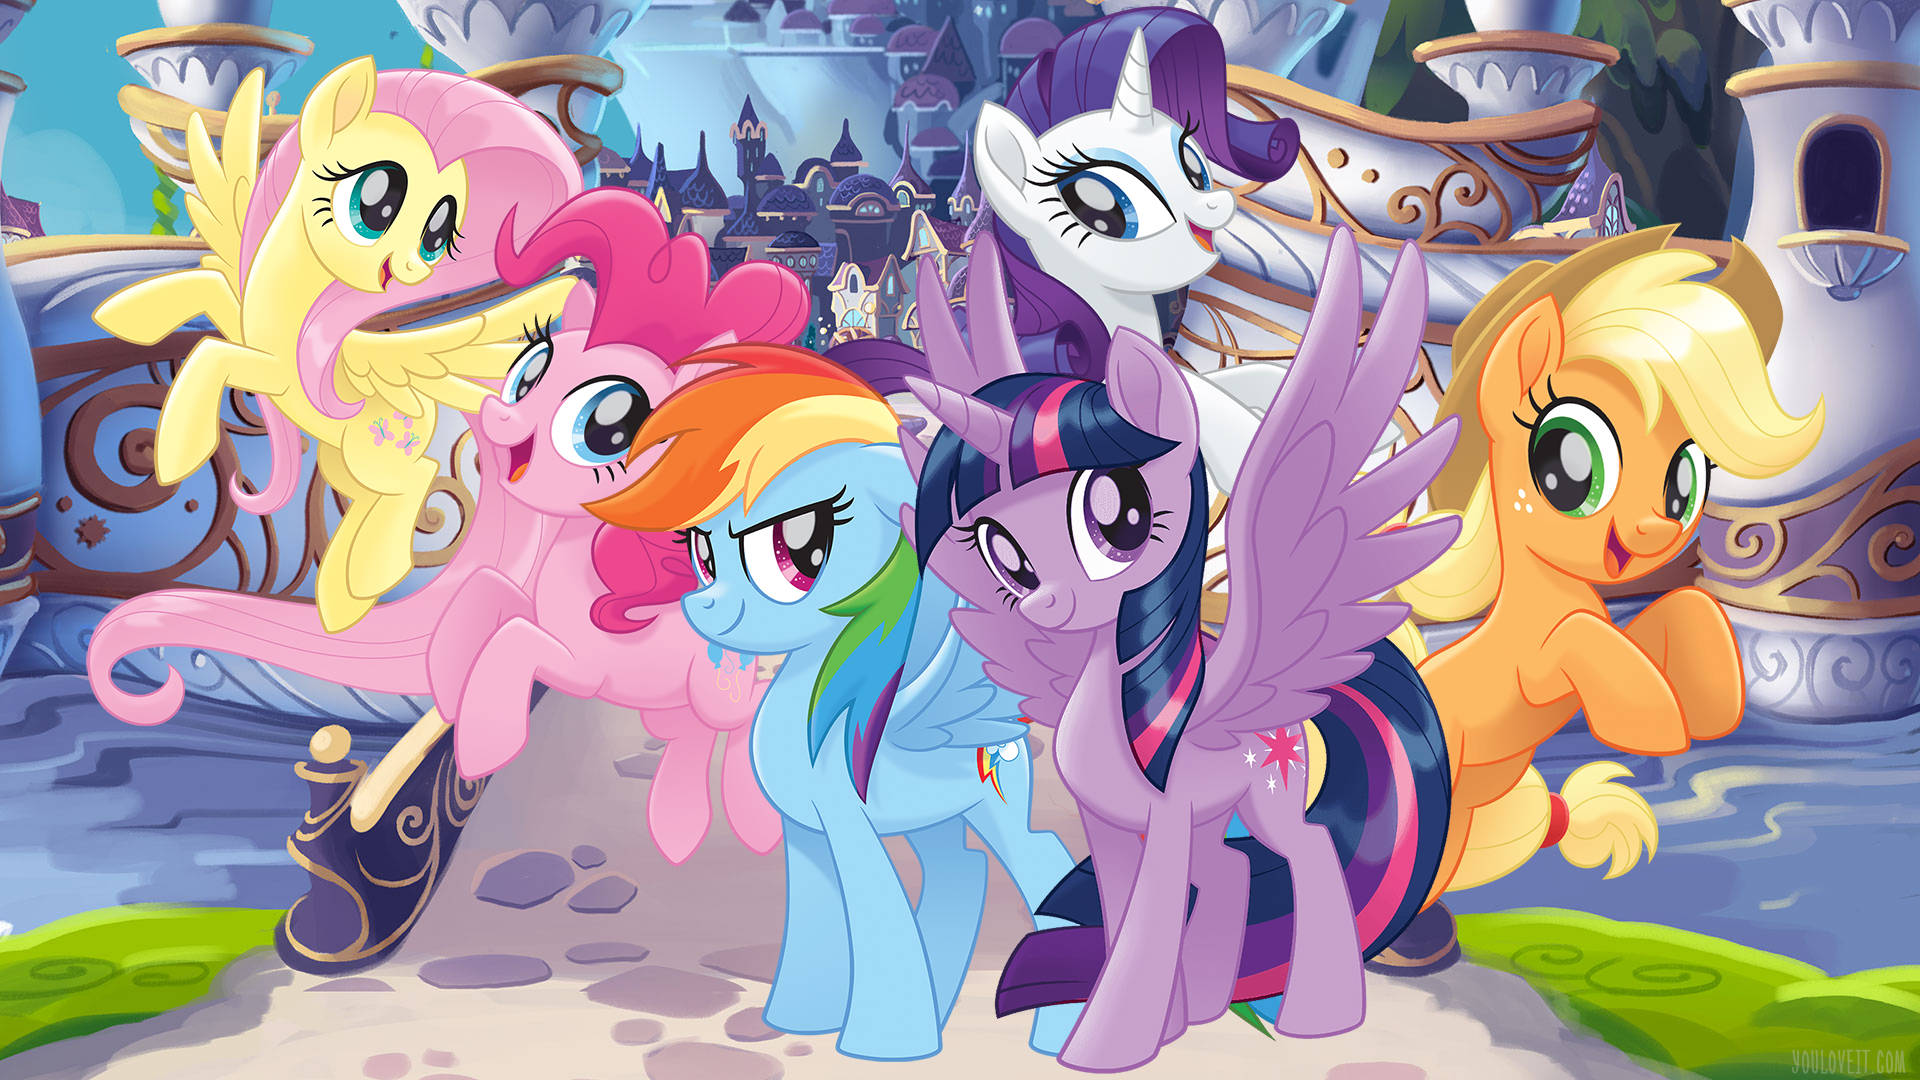 Enjoy The Colorful World Of Friendship With My Little Pony Desktop Background